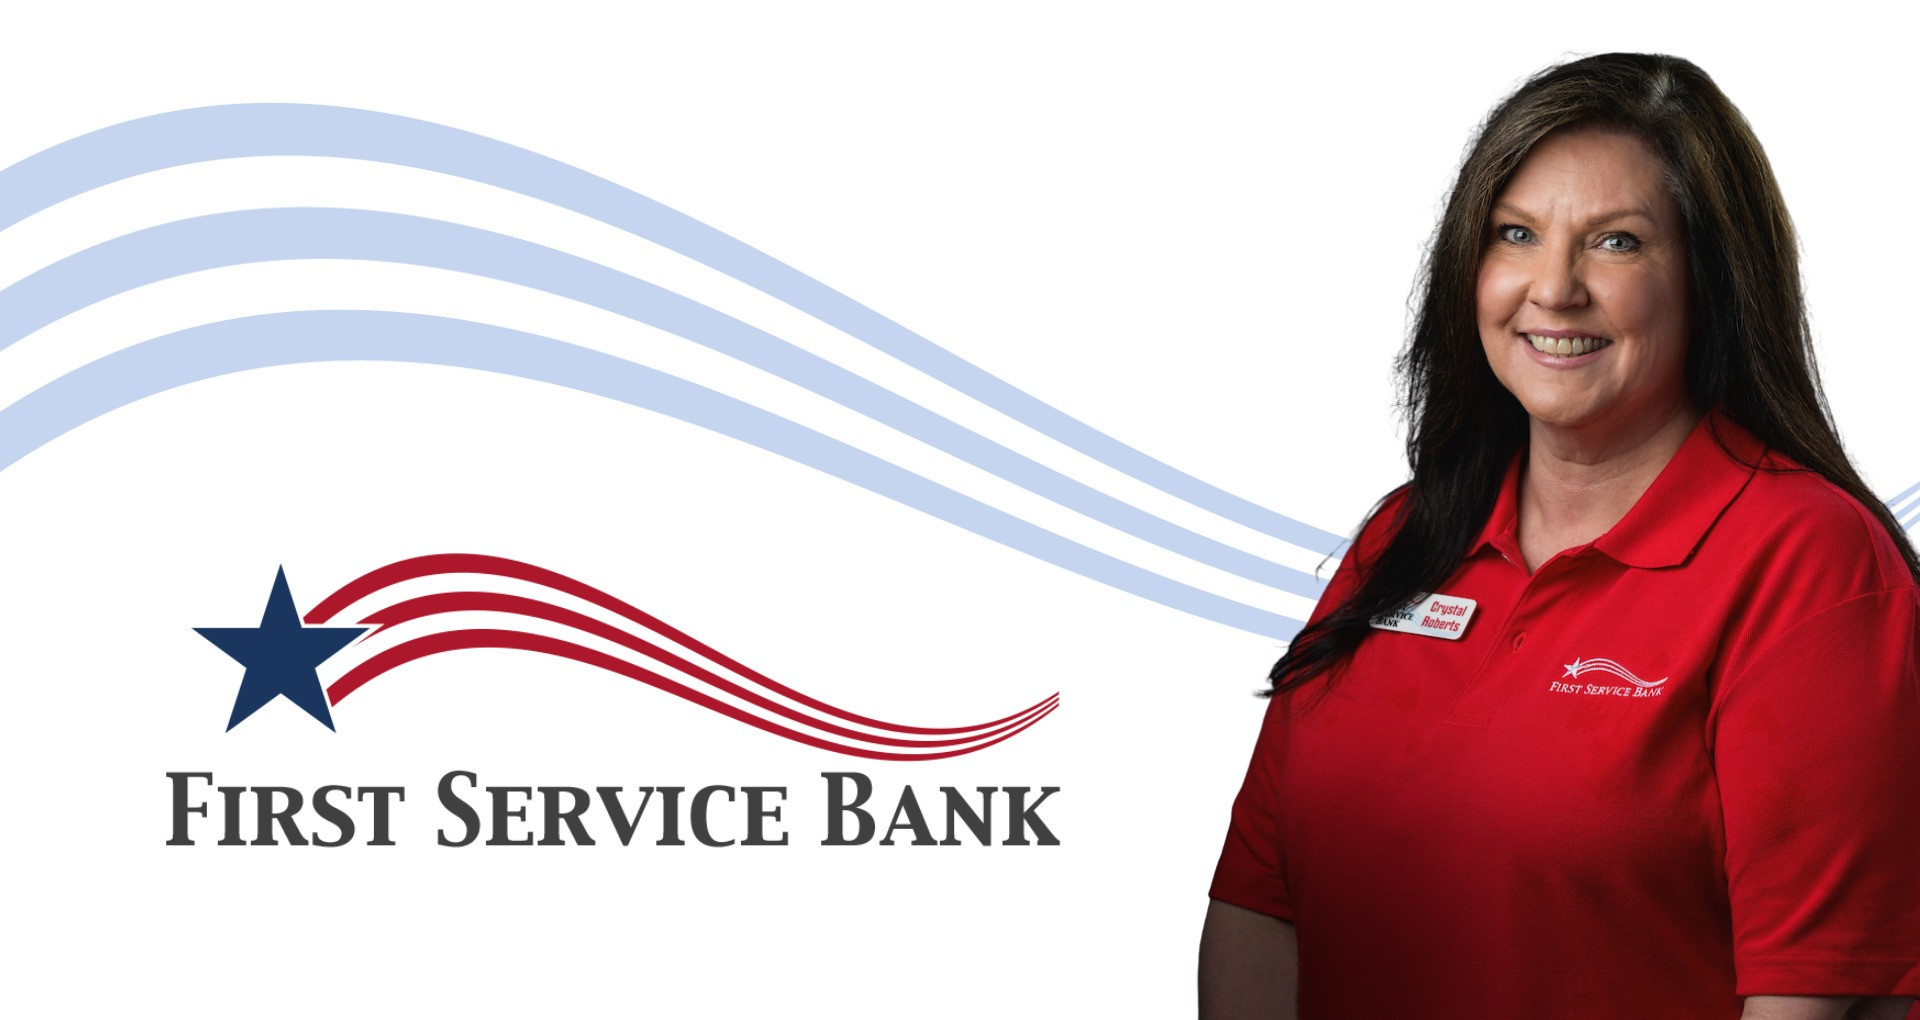 Crystal L. Roberts Joins First Service Bank as Branch Manager and Loan Officer for Maumelle